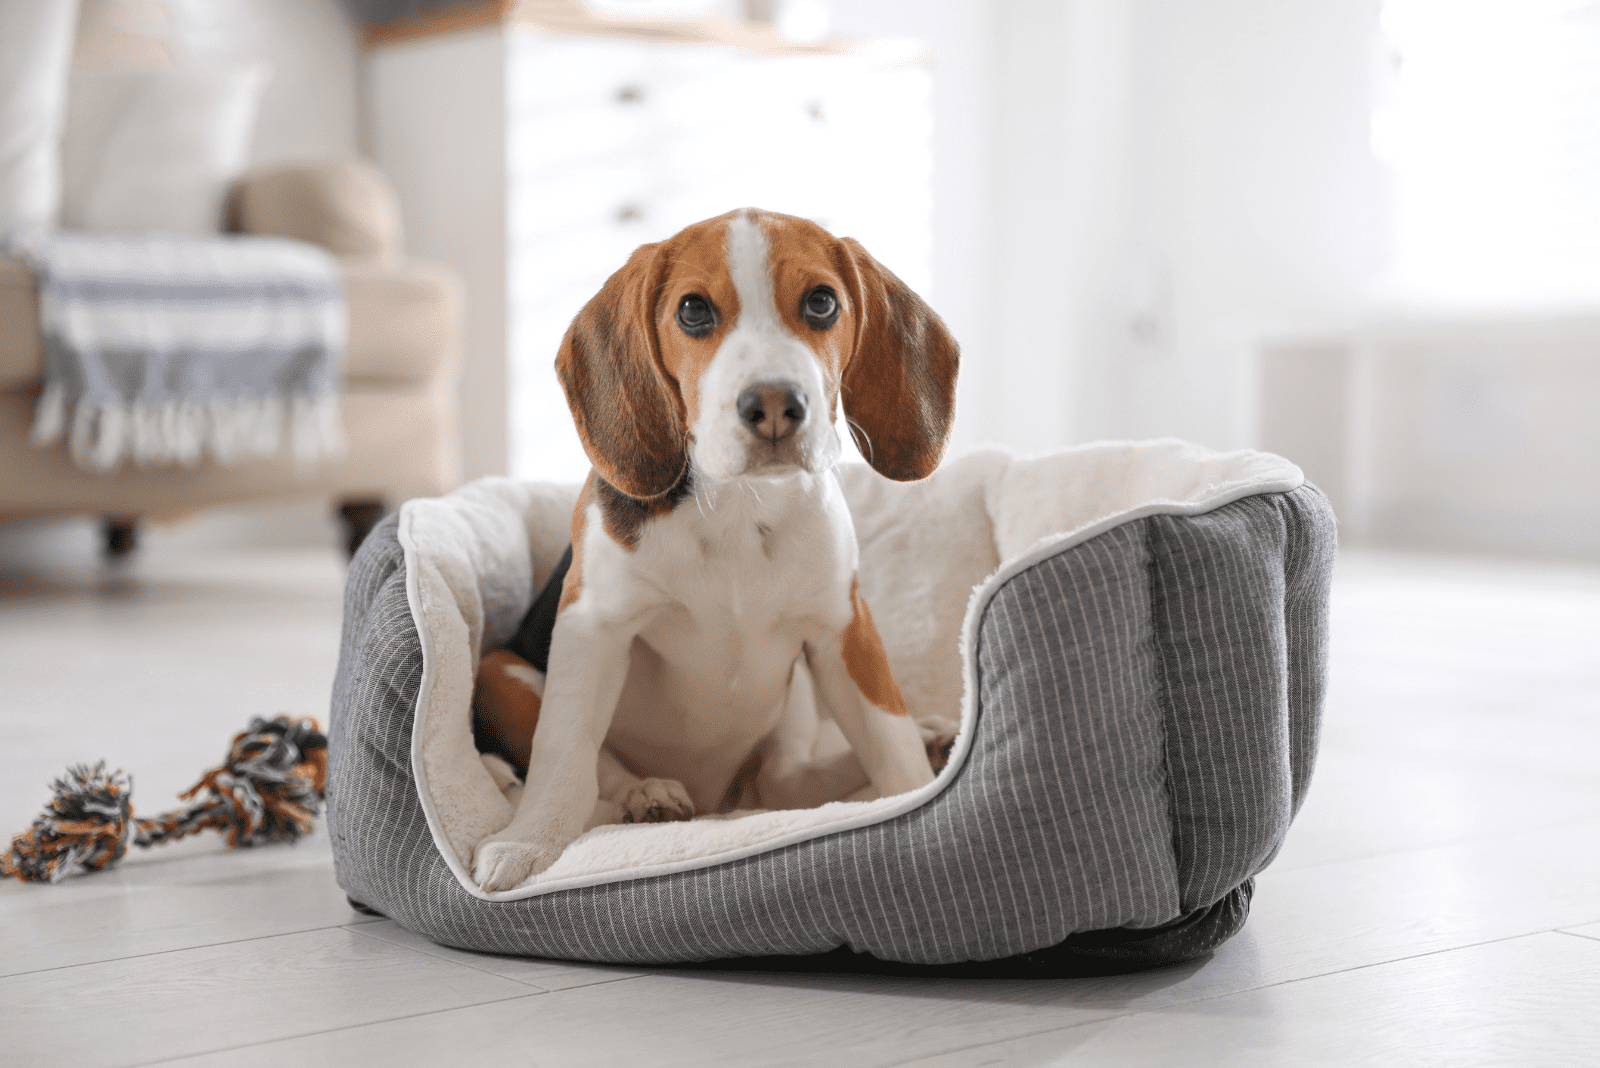 Beagle is sitting on his pillow